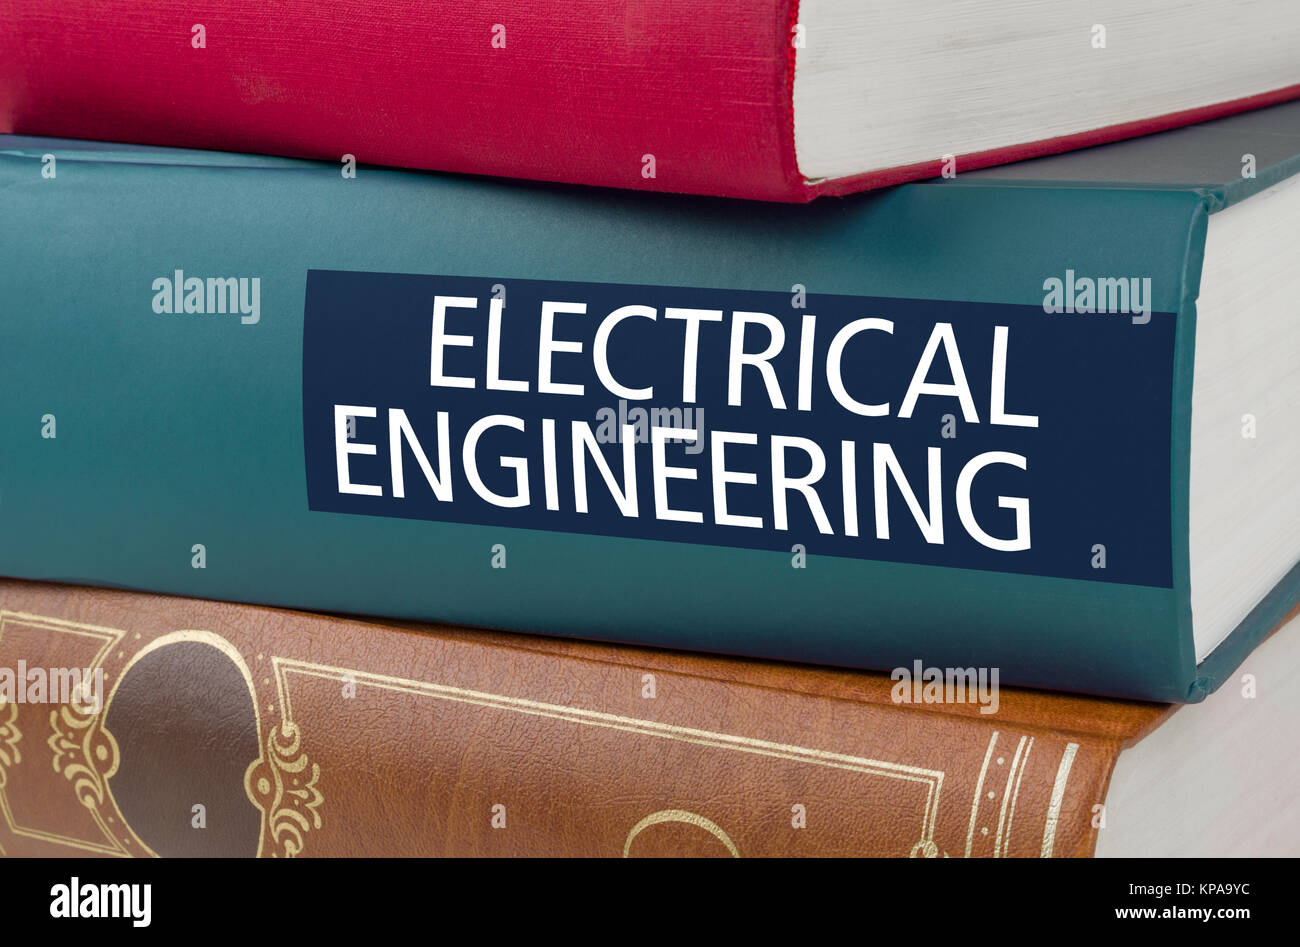 A book with the title Electrical Engeneering written on the spine Stock Photo